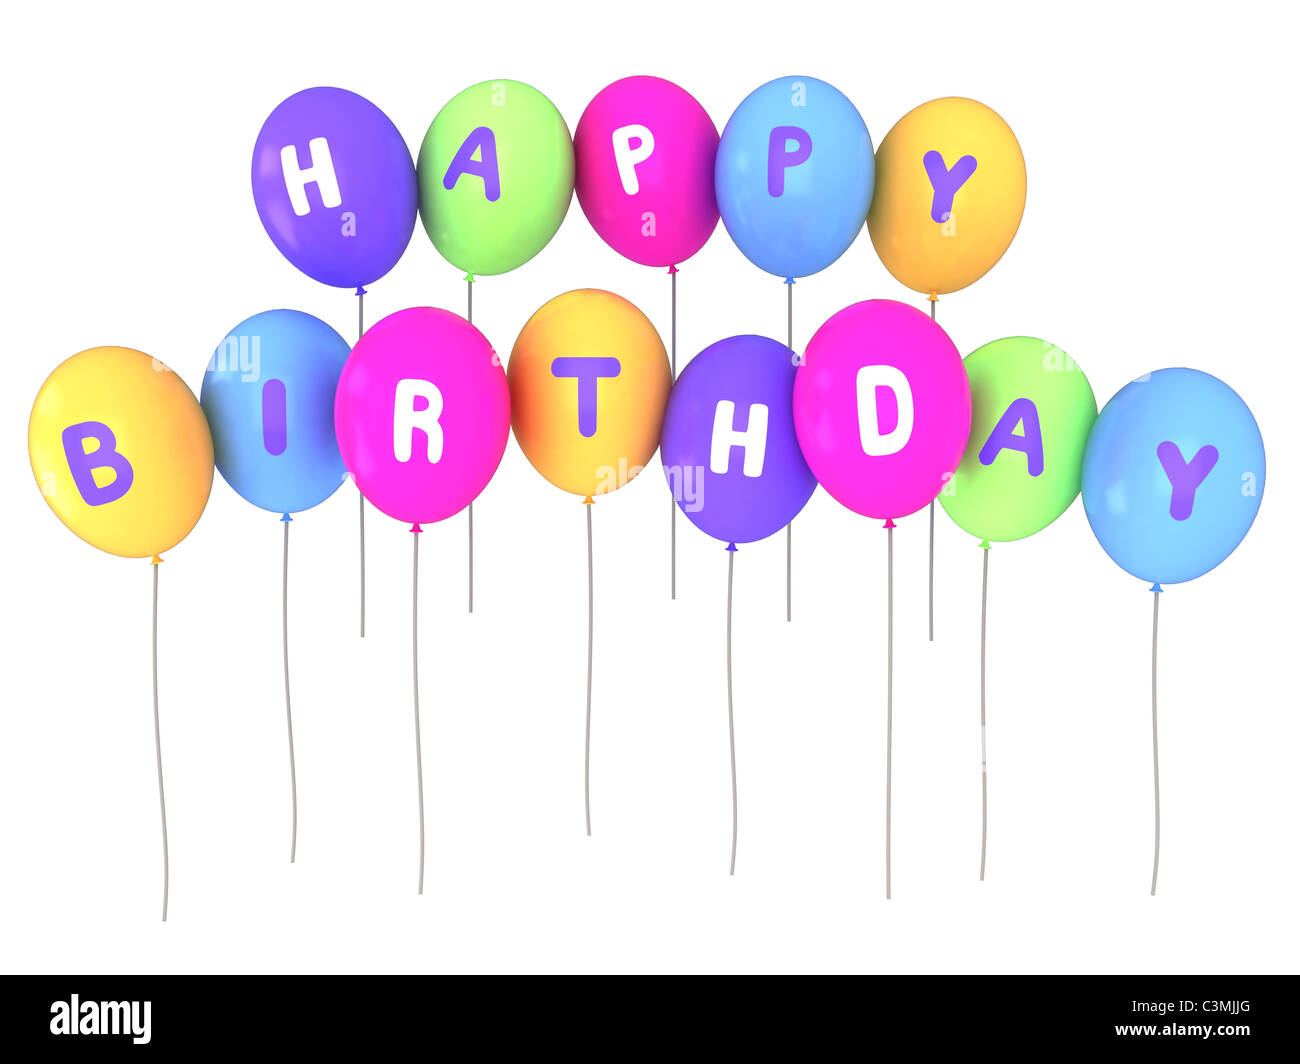 3D Illustration of Balloons That Spell the Words Happy Birthday Stock Photo  - Alamy